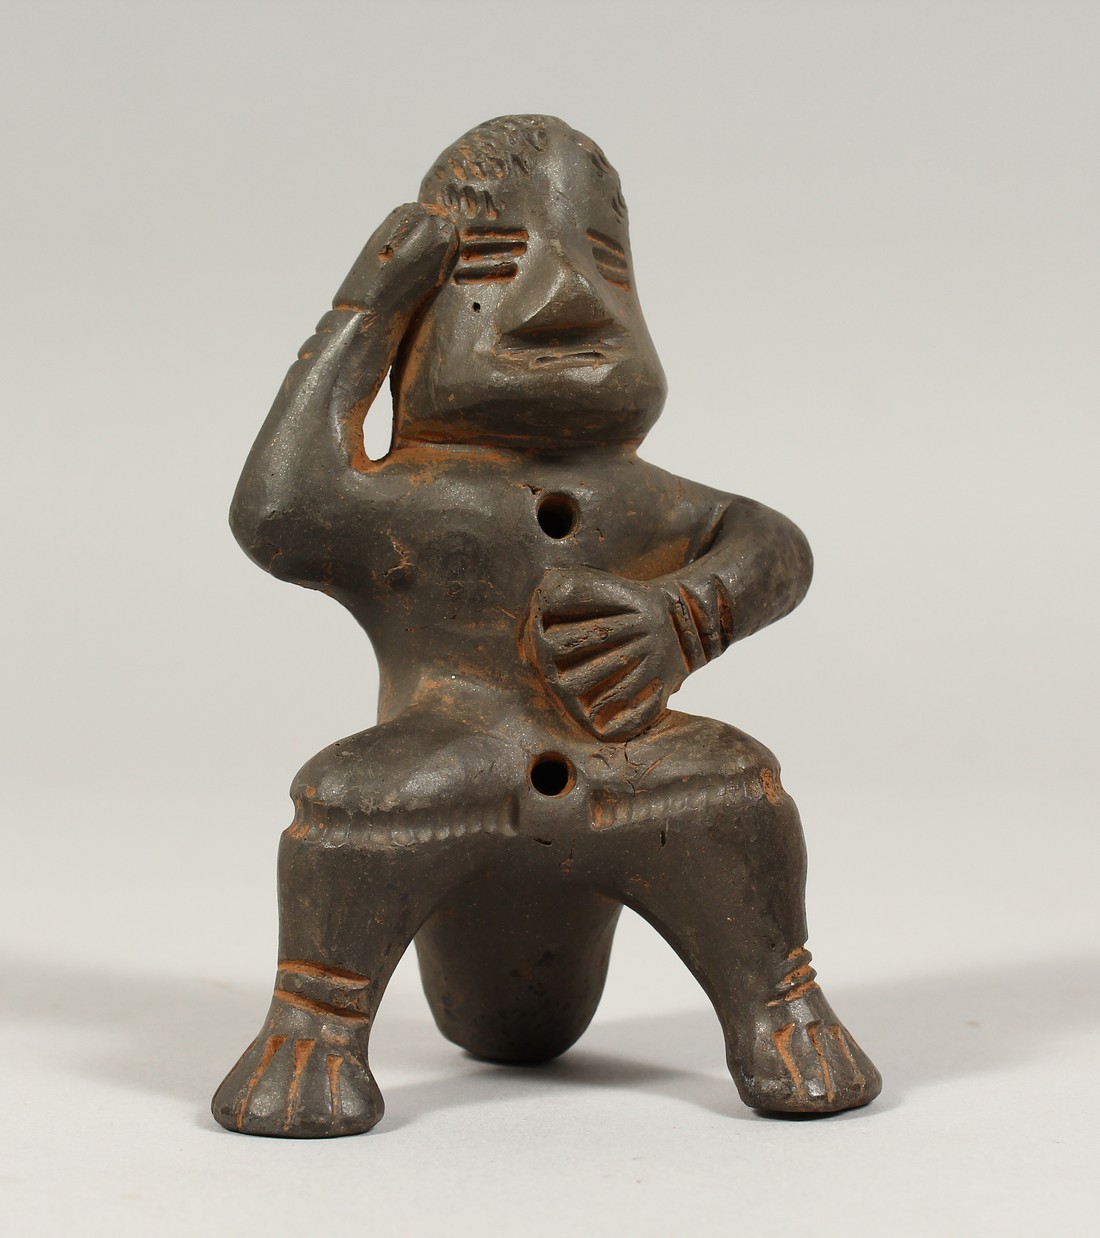 A SOUTH AMERICAN POTTERY WHISTLE as a seated figure,possibly from Peru. 4ins long